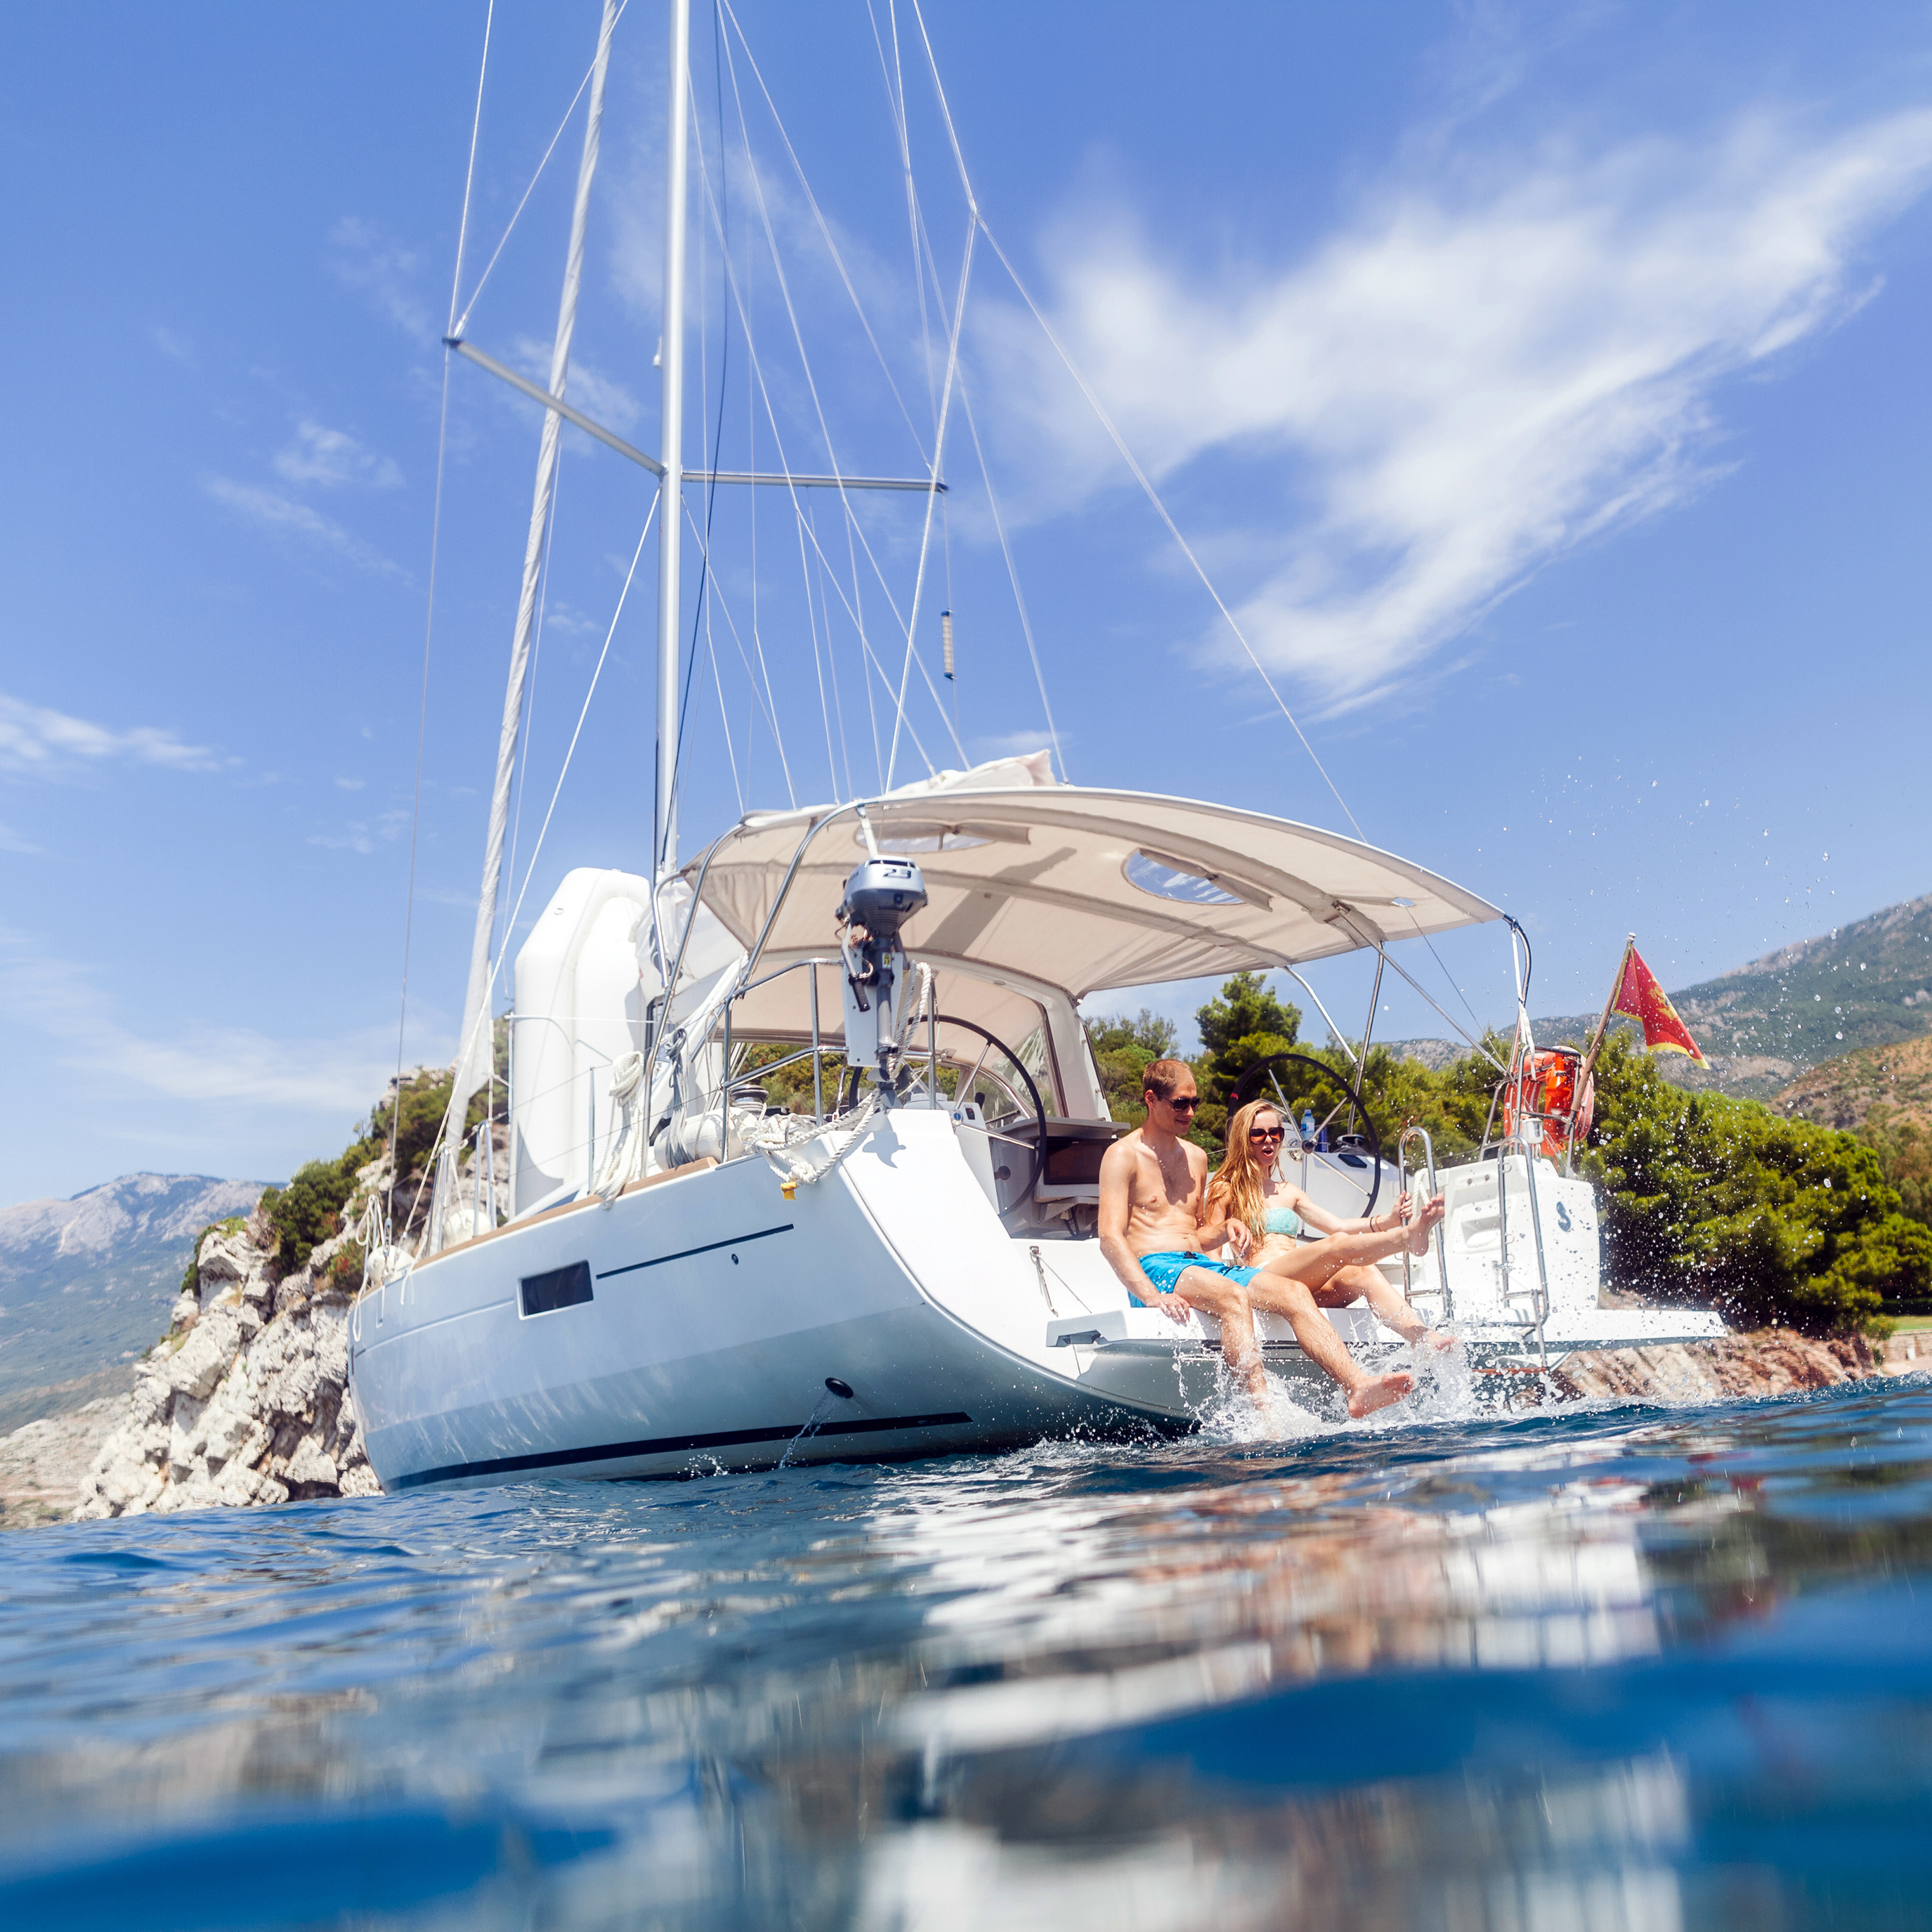 Special Offer Sailboat Yacht Charter Deals by Oceanedia